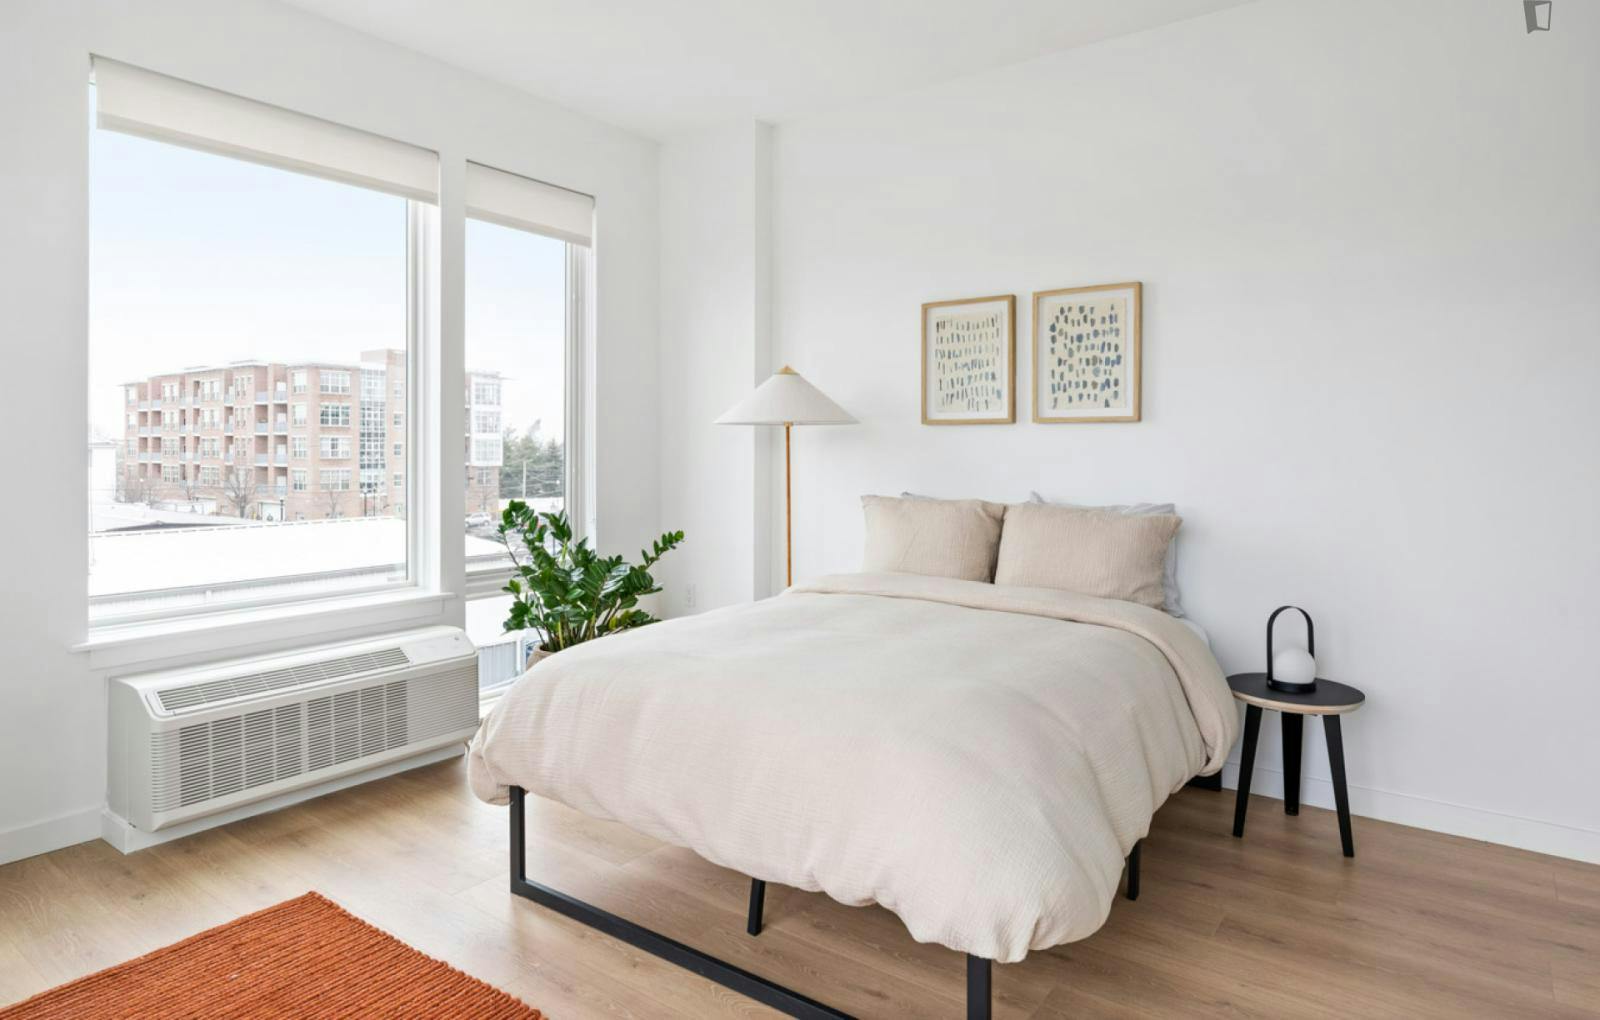 Appealing double bedroom near Lincoln Park